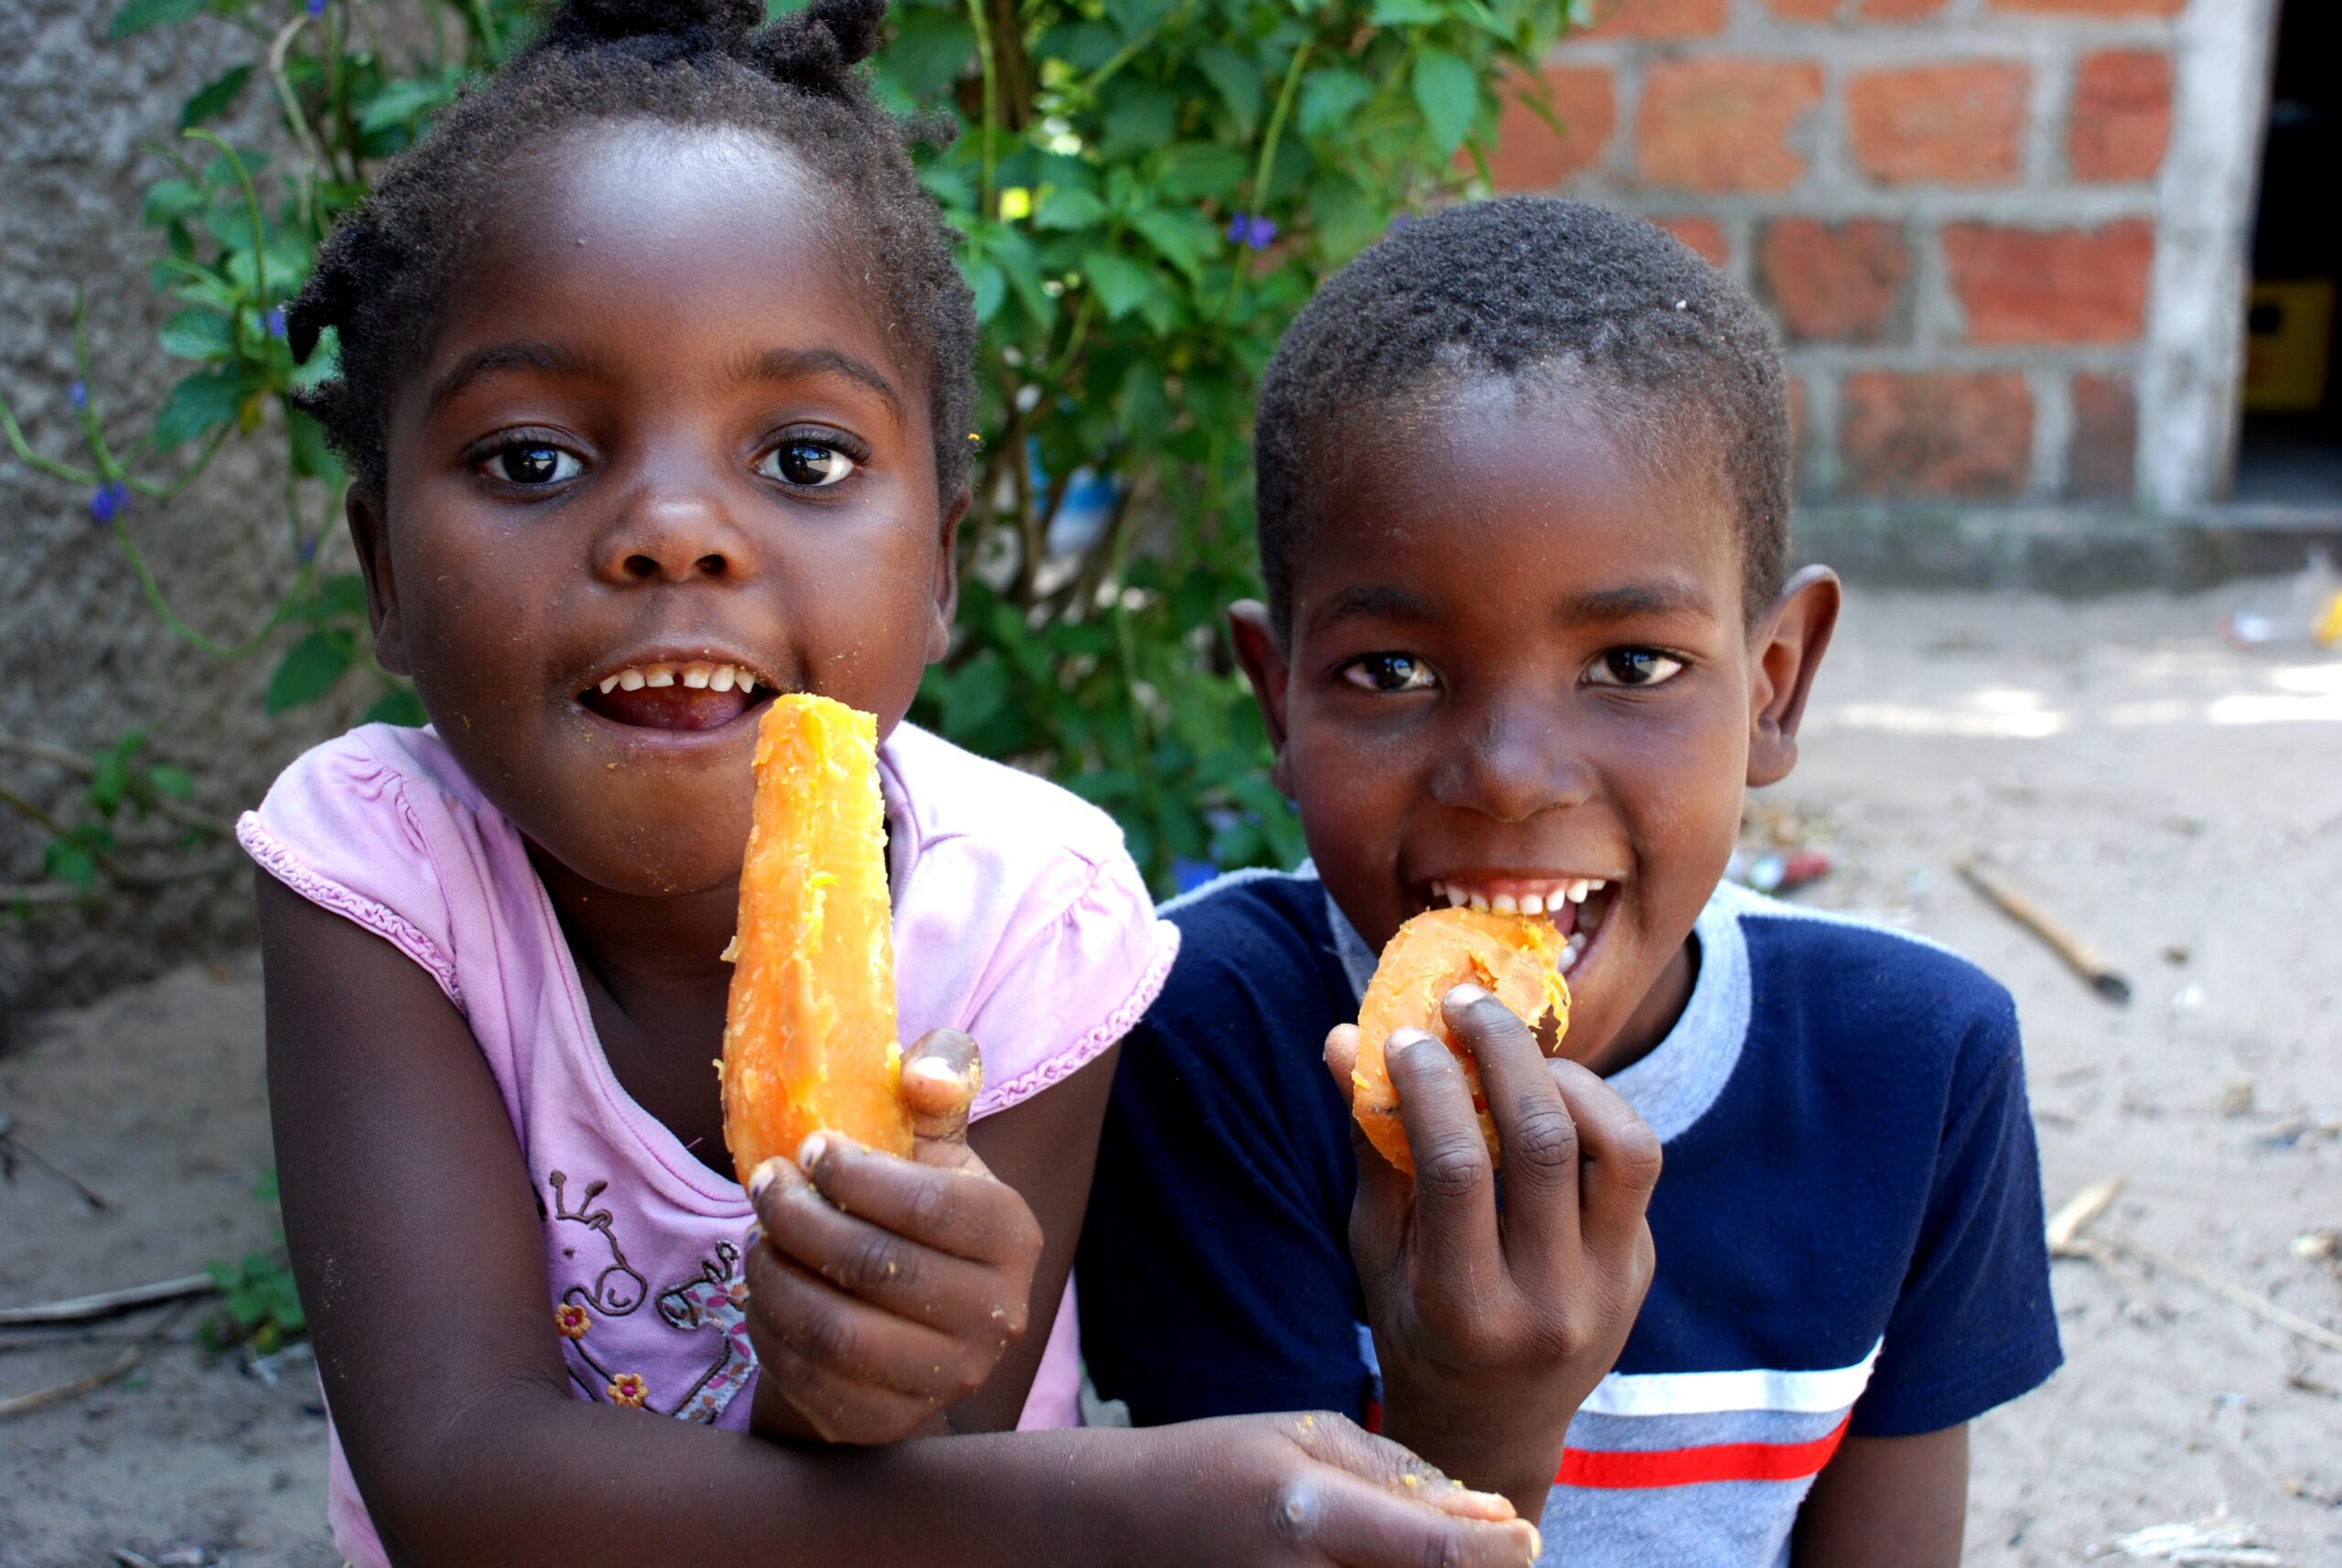 A boy and girl eating sweet potatoes